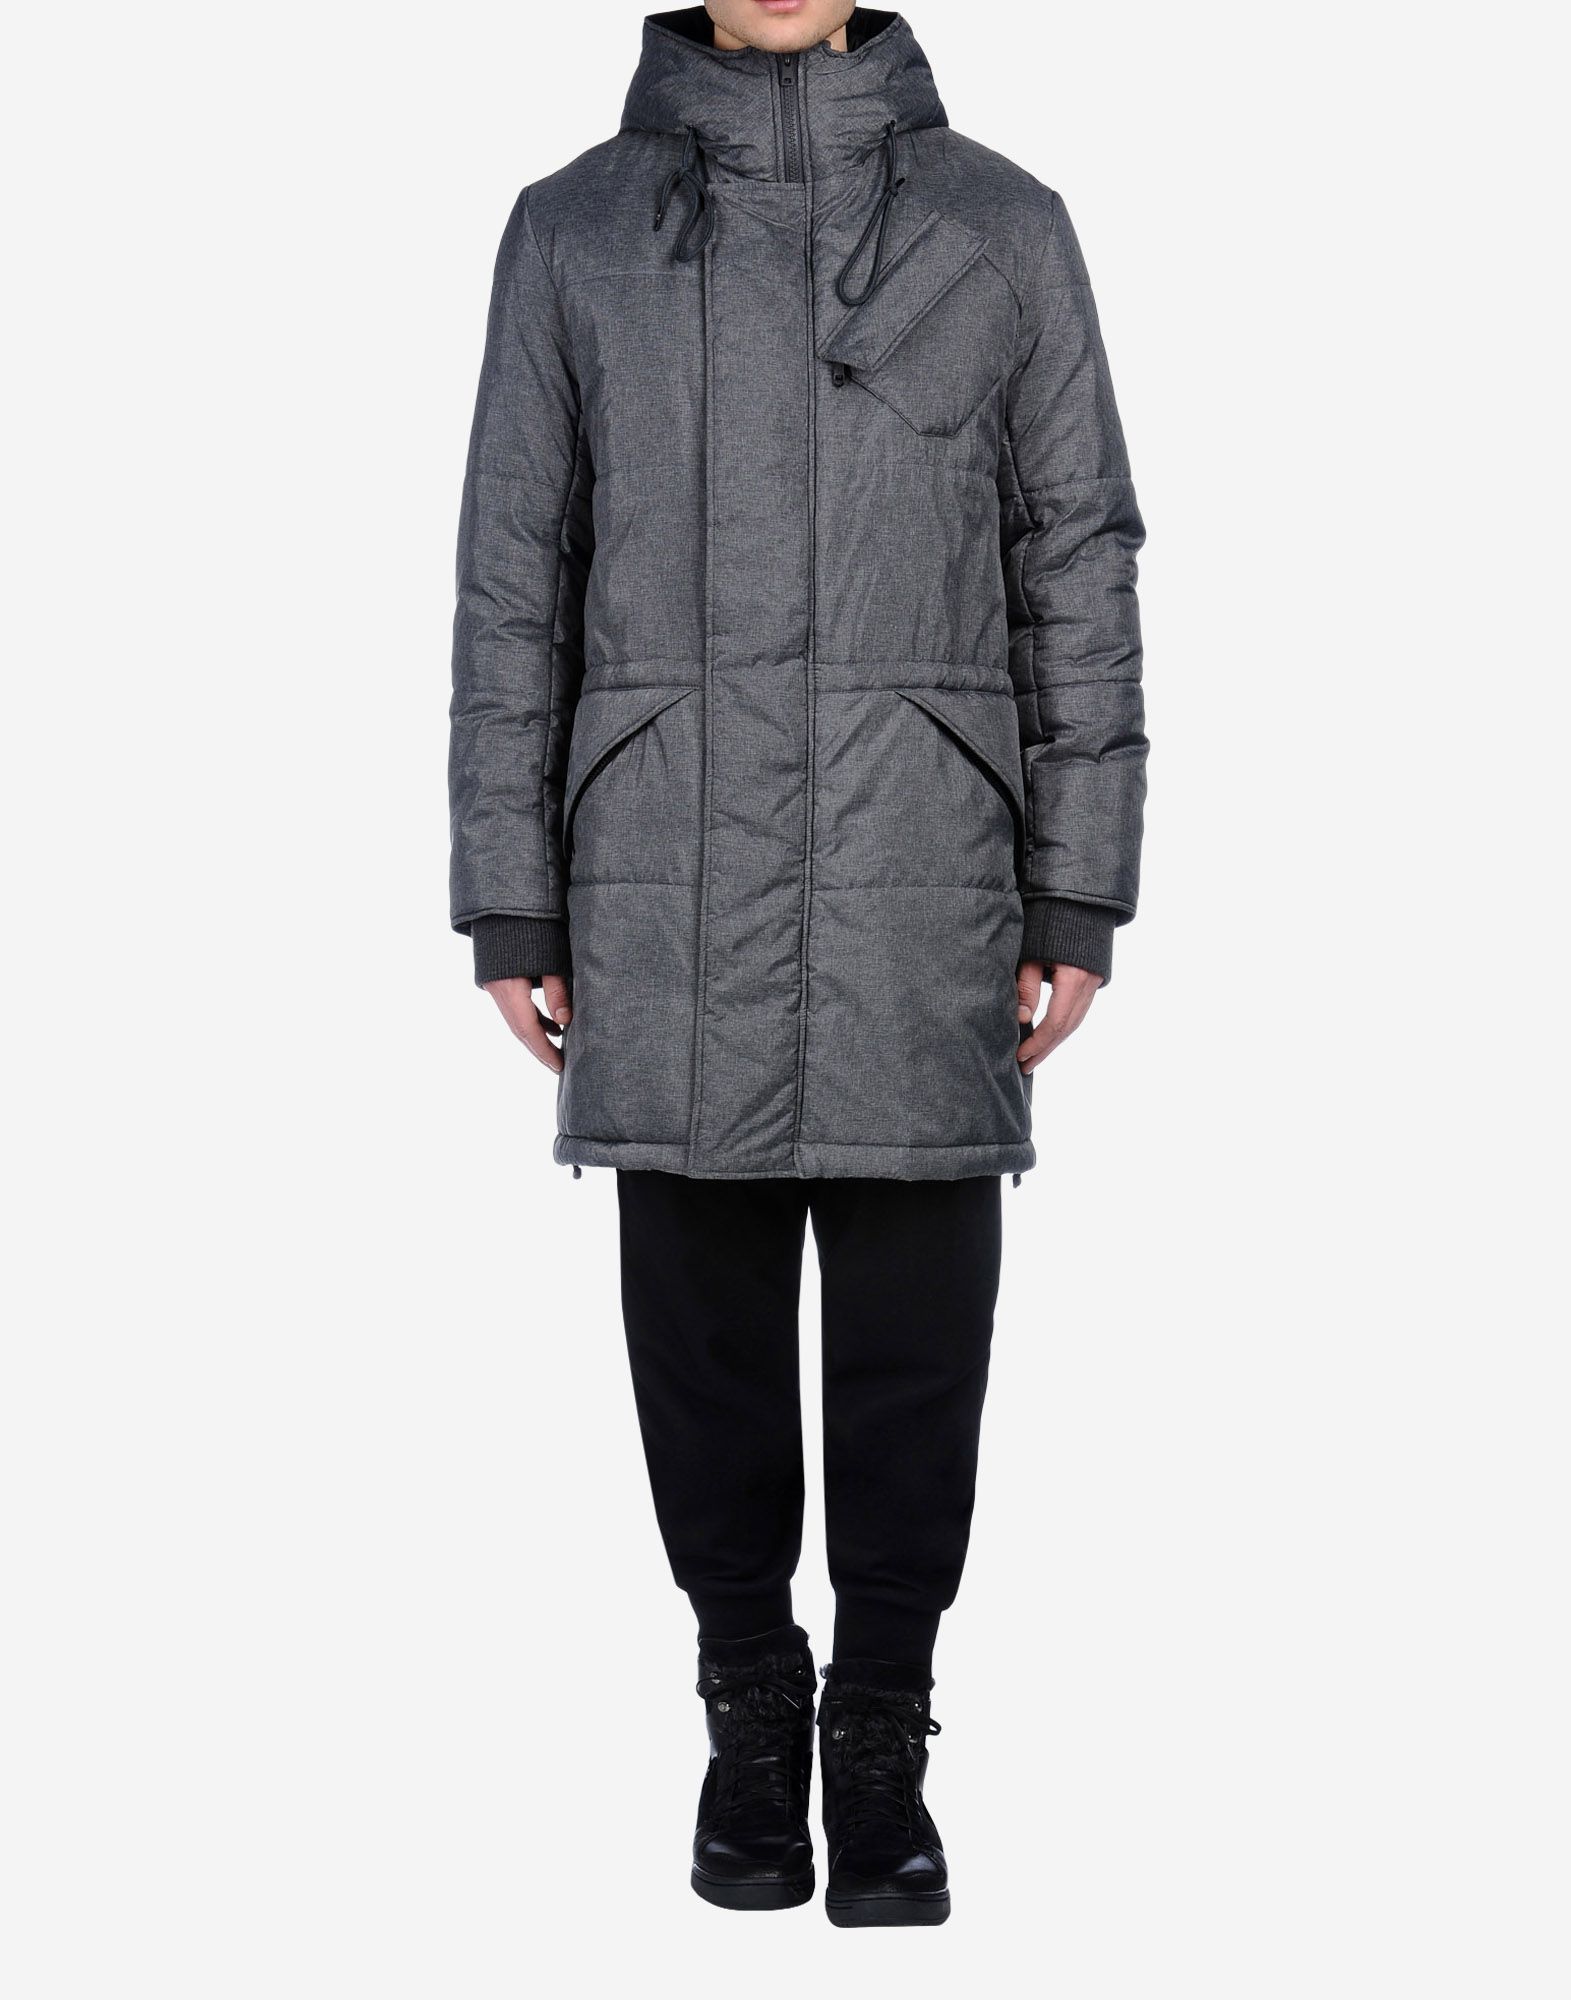 Y 3 Padded Parka for Men | Adidas Y-3 Official Store